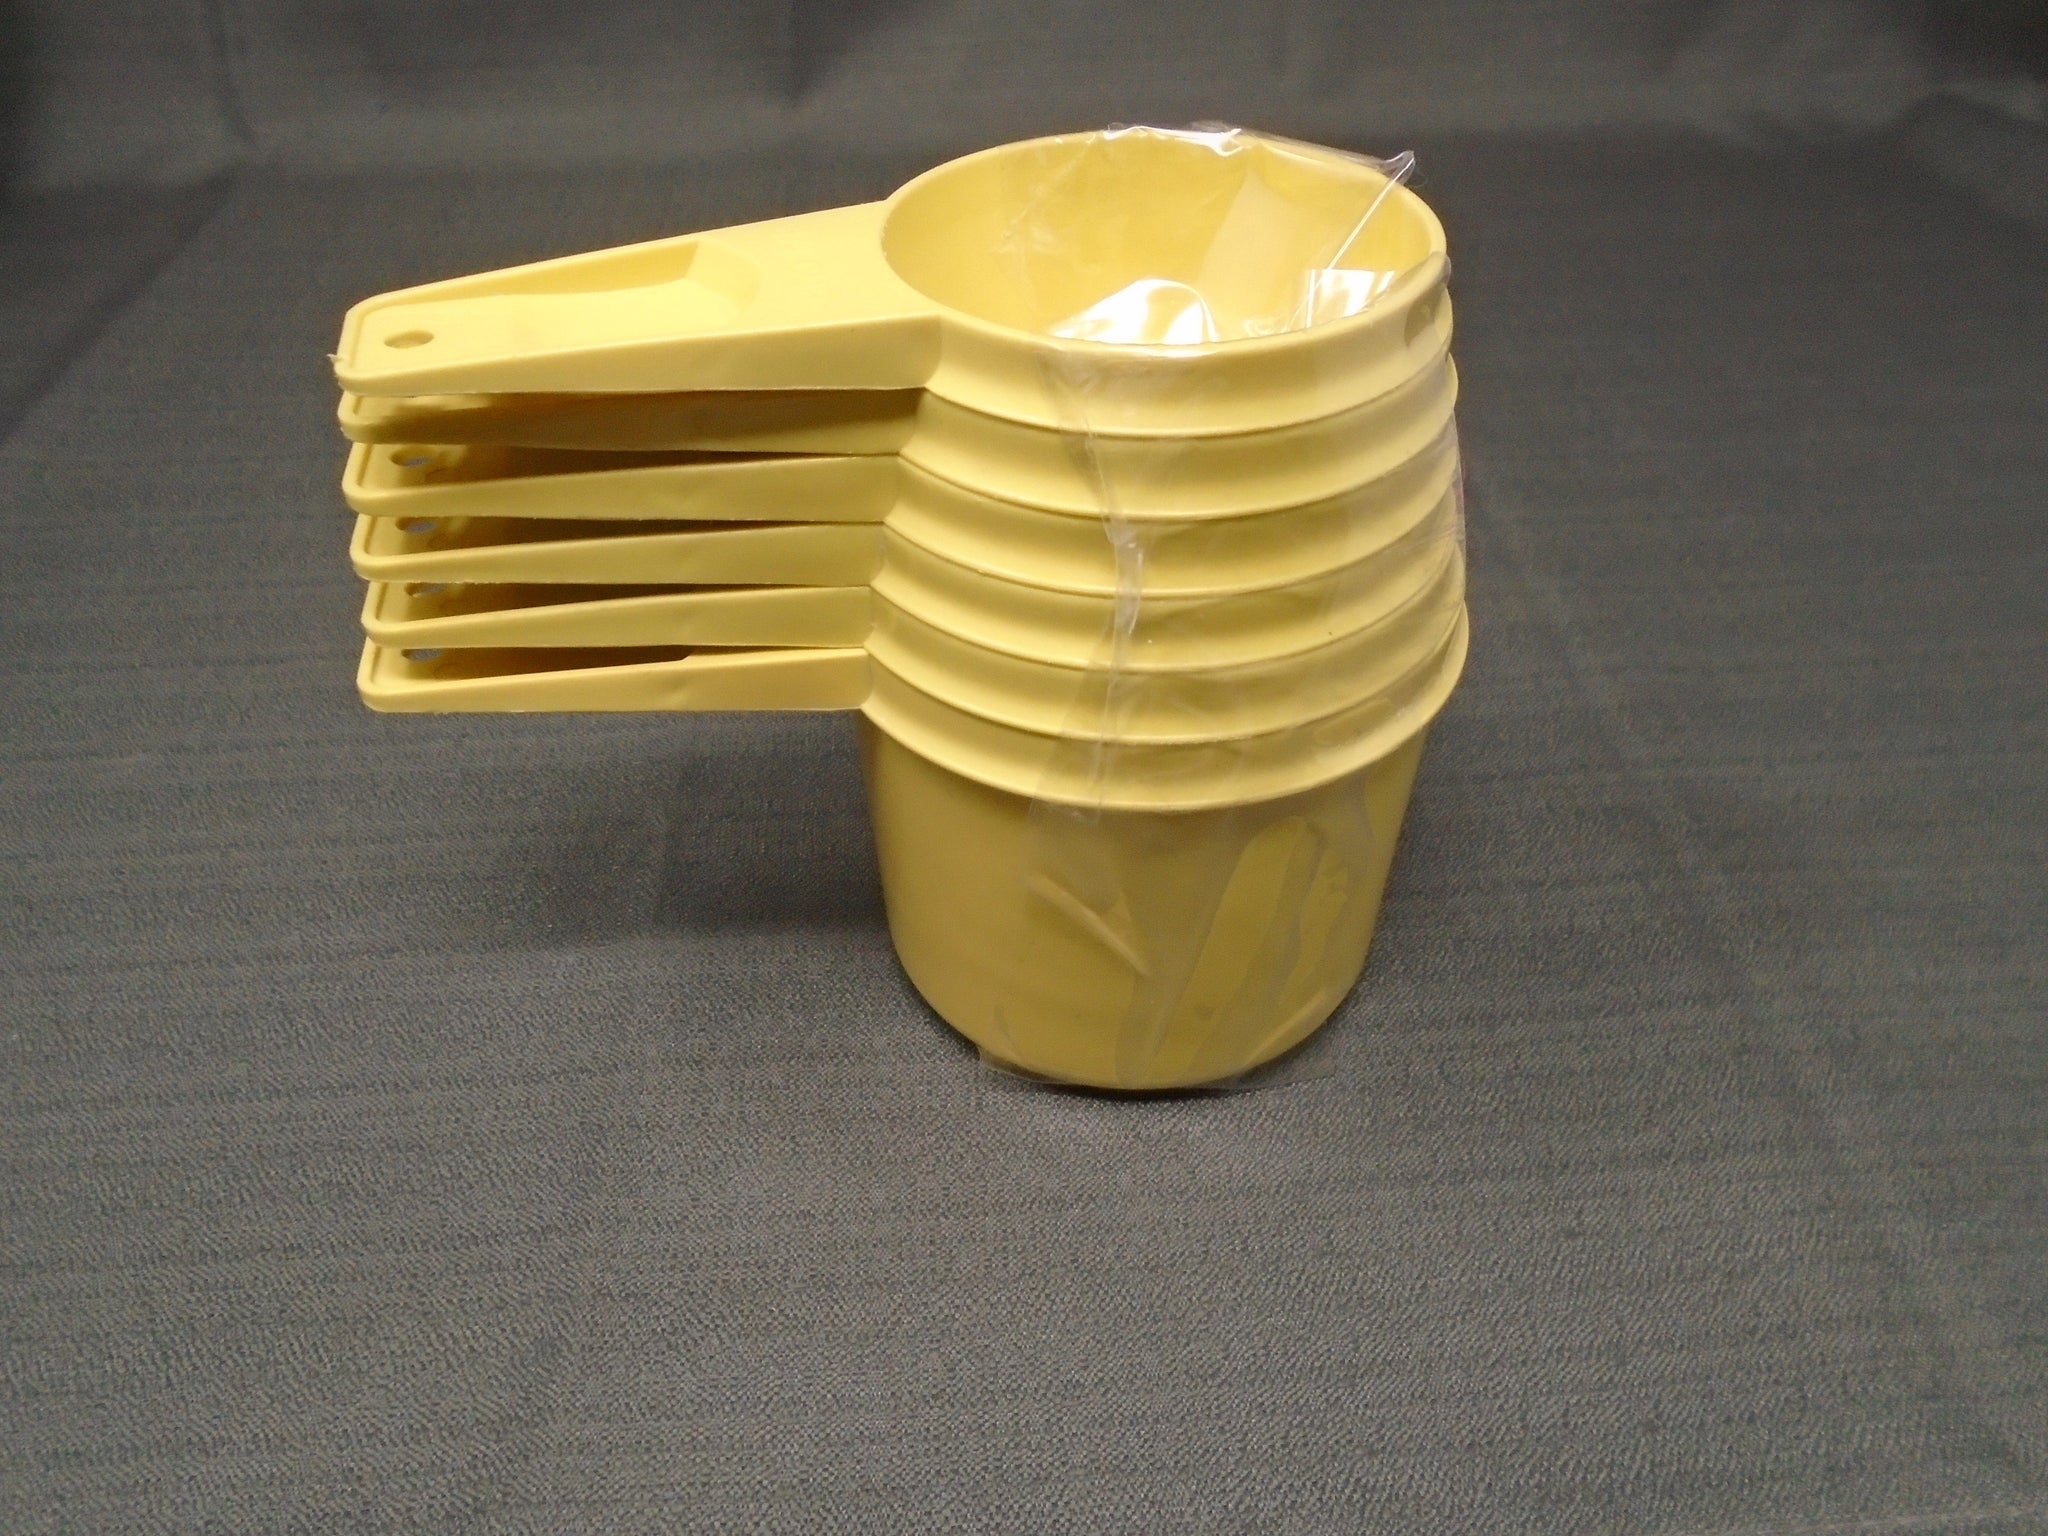 tupperware measuring cups from